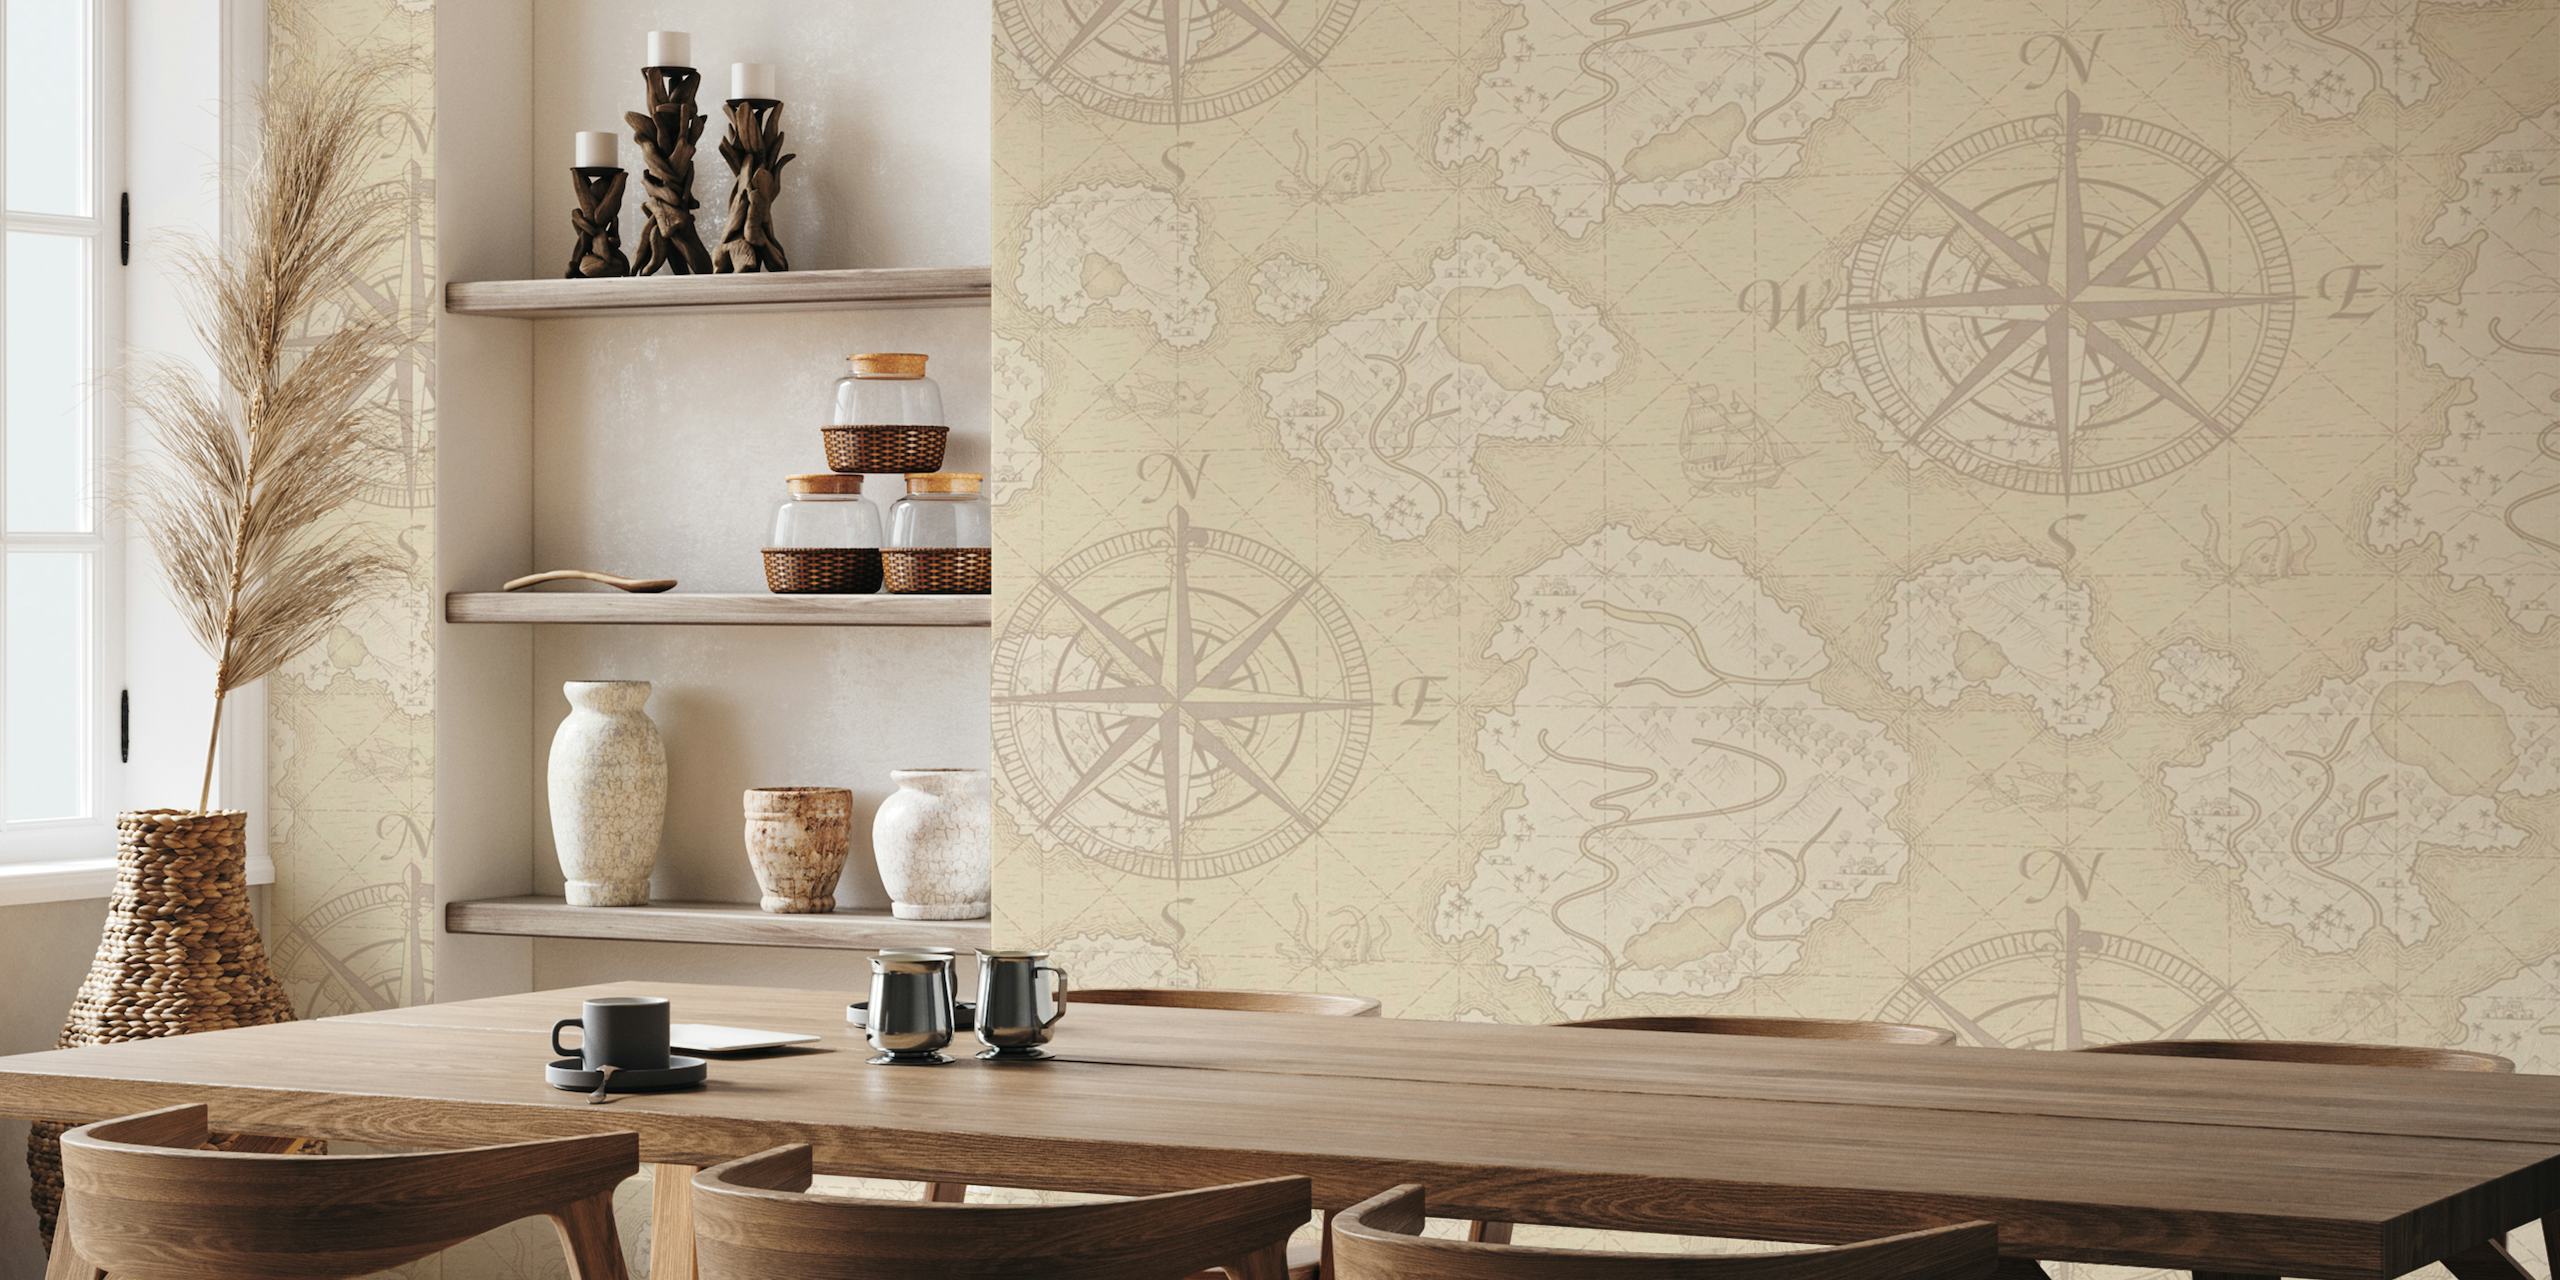 Classic Fantasy Vintage Map themed wall mural featuring beige compass designs on a parchment-style background.